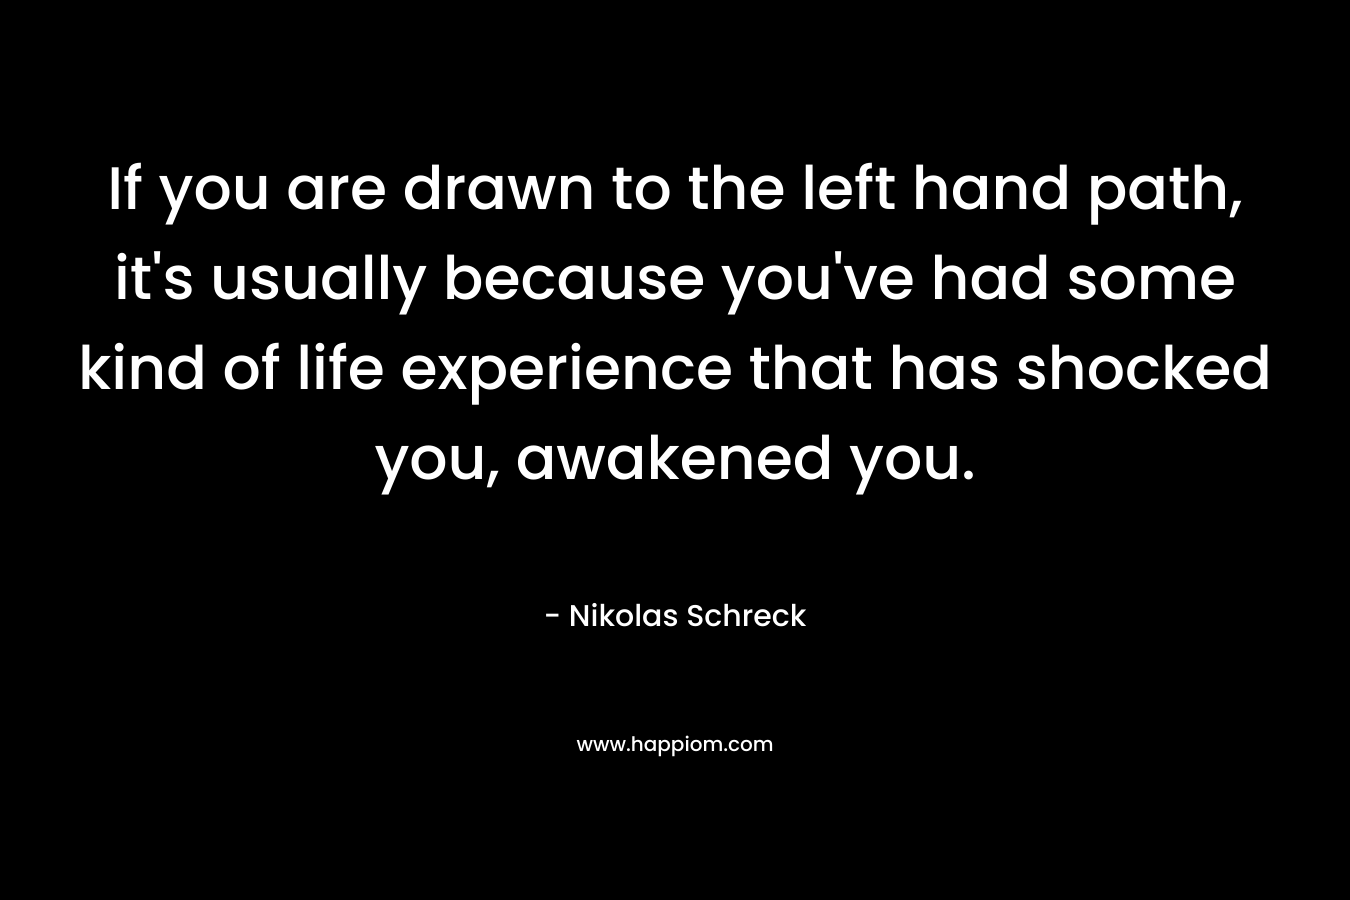 If you are drawn to the left hand path, it's usually because you've had some kind of life experience that has shocked you, awakened you.